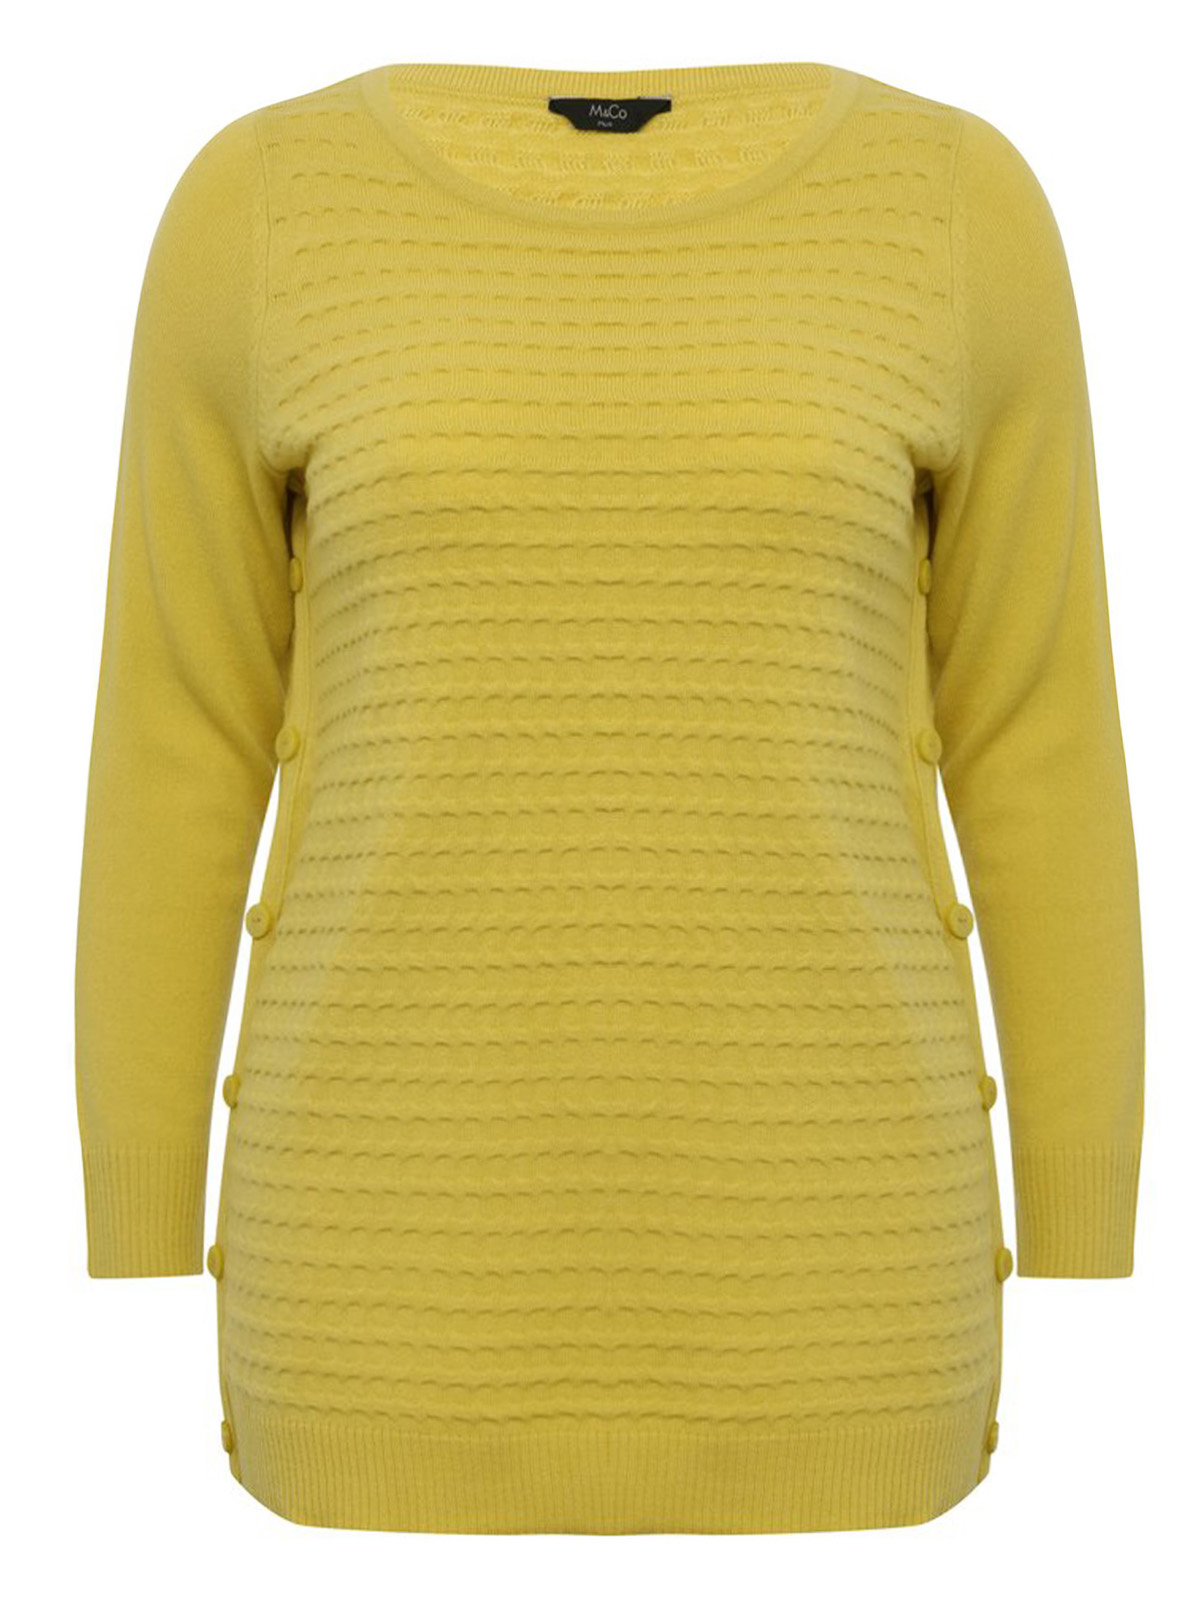 M&Co - - M&Co LIME Textured Knit Button Side Jumper - Plus Size 18 to 28